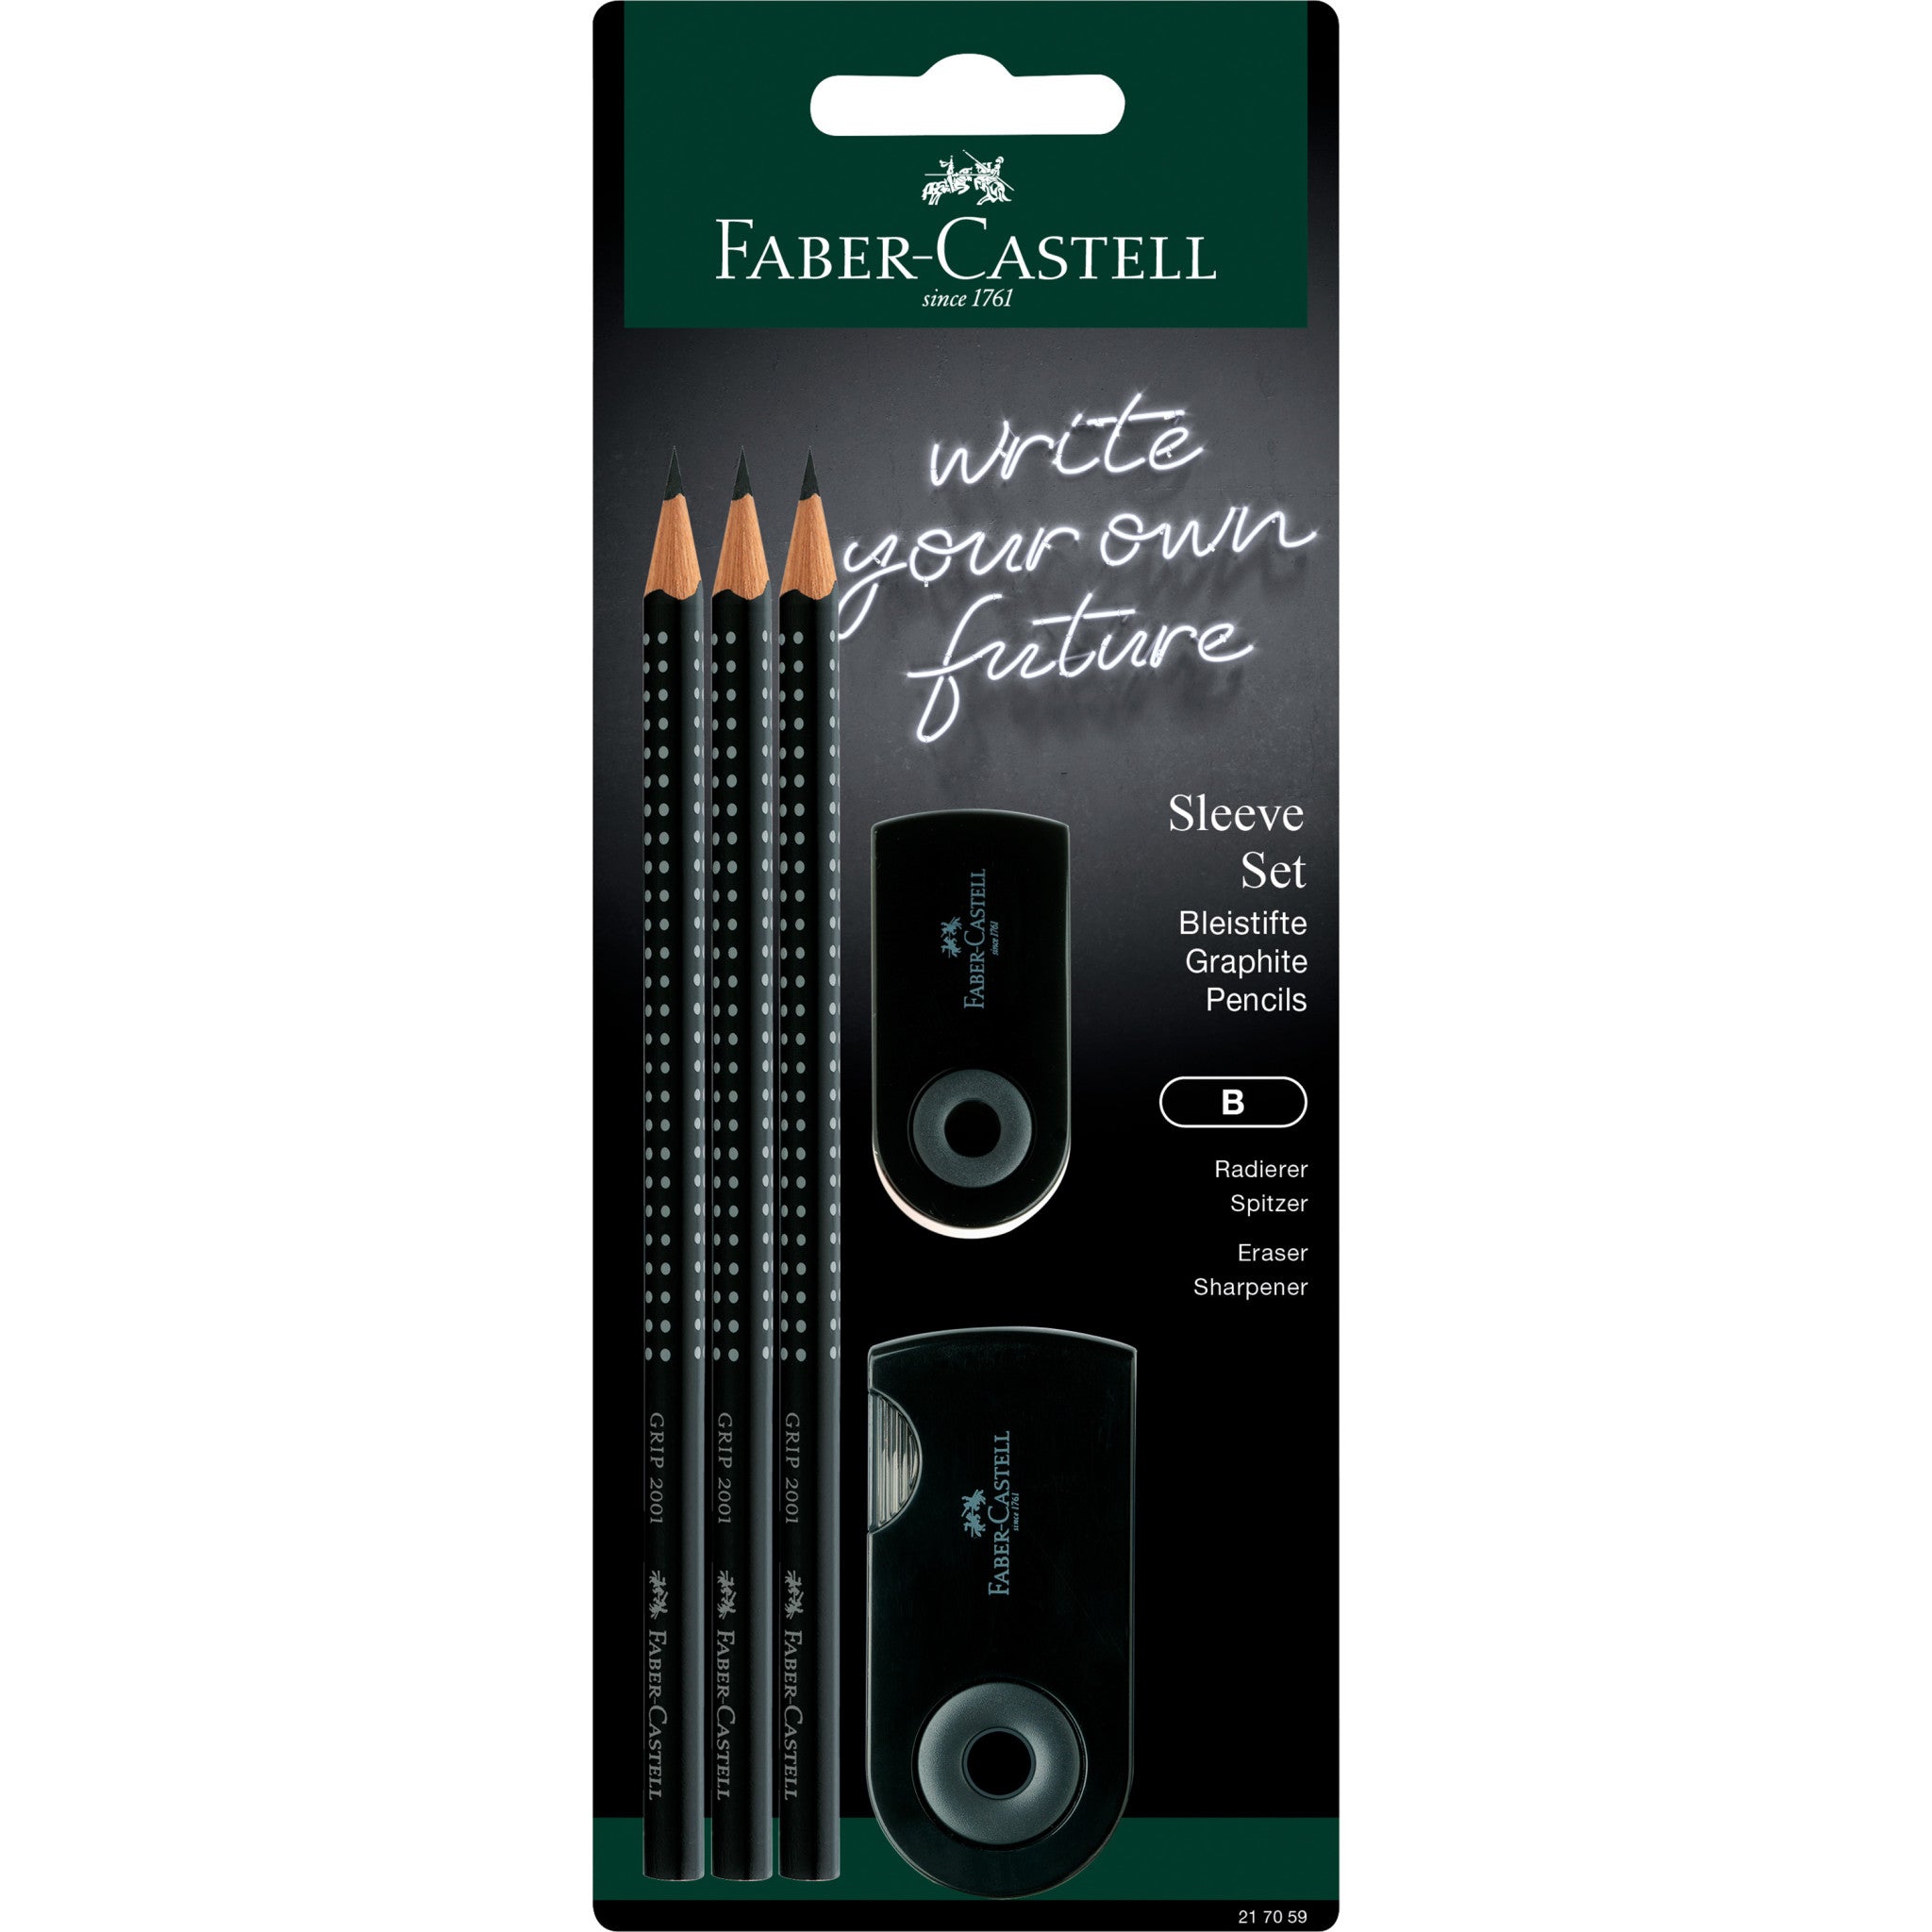 Faber-Castell pencil with attachment